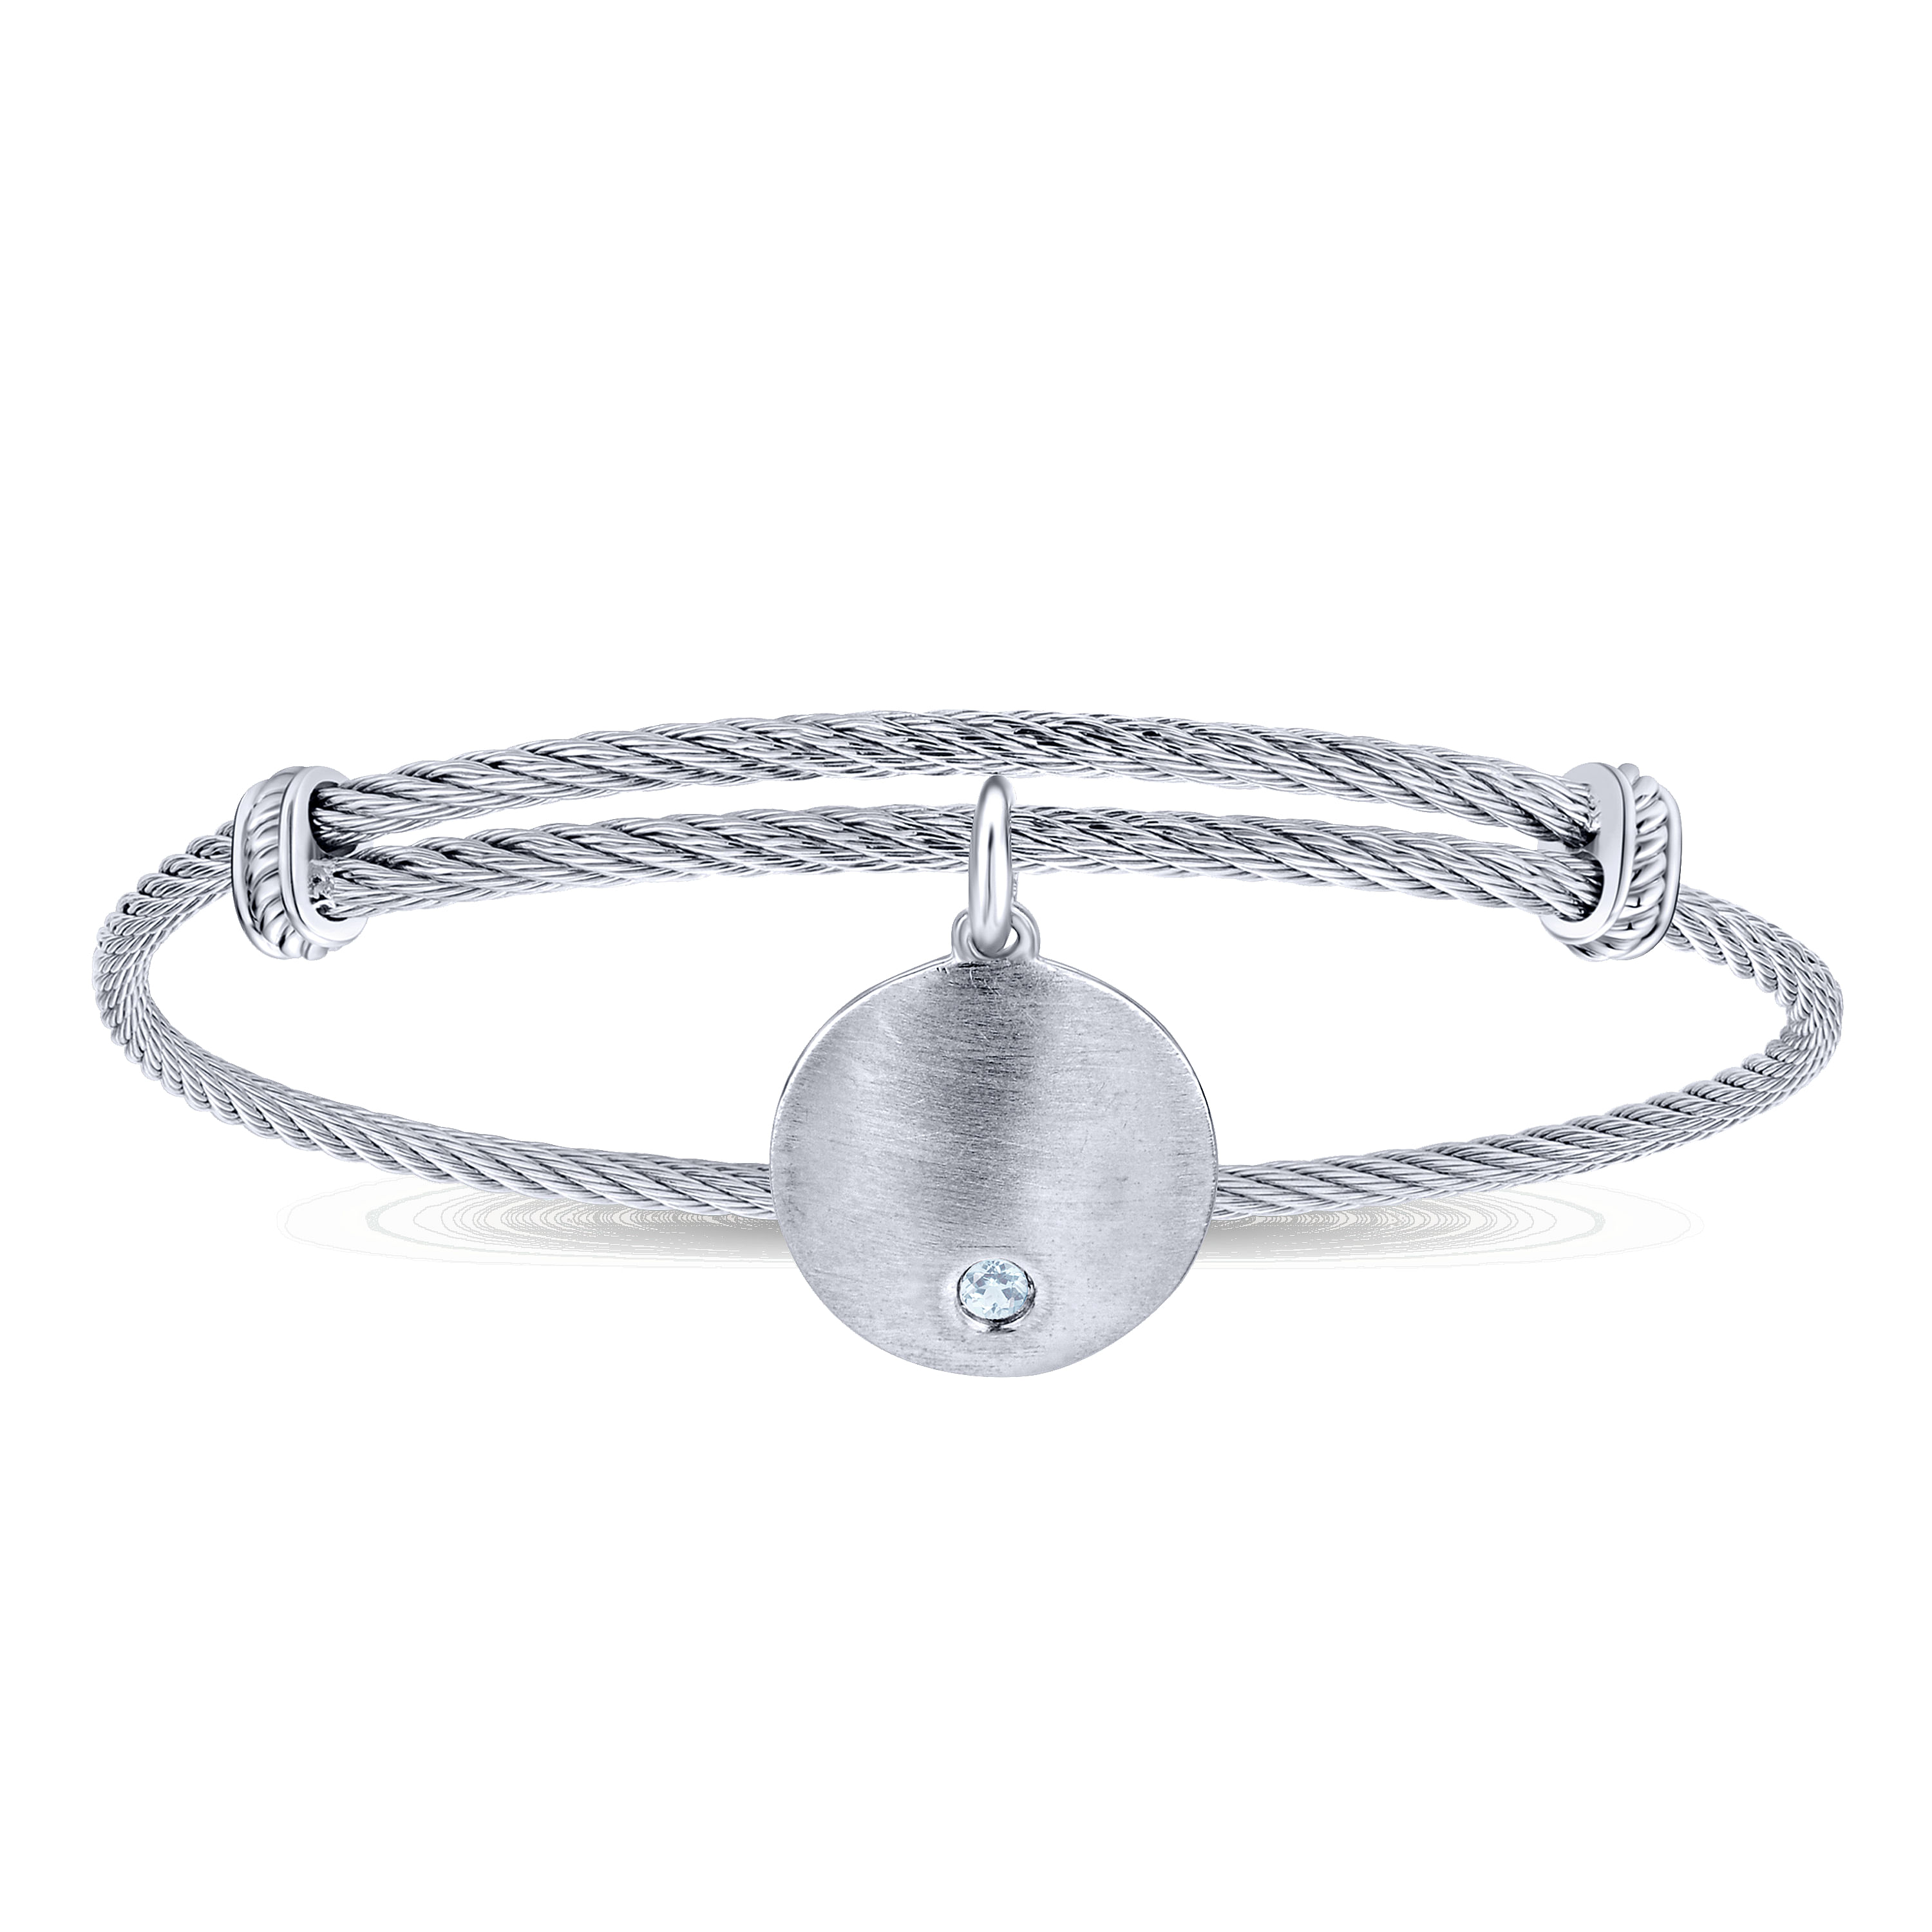 Adjustable Stainless Steel Bangle with Round Sterling Silver Sky Blue Topaz Stone Disc Charm